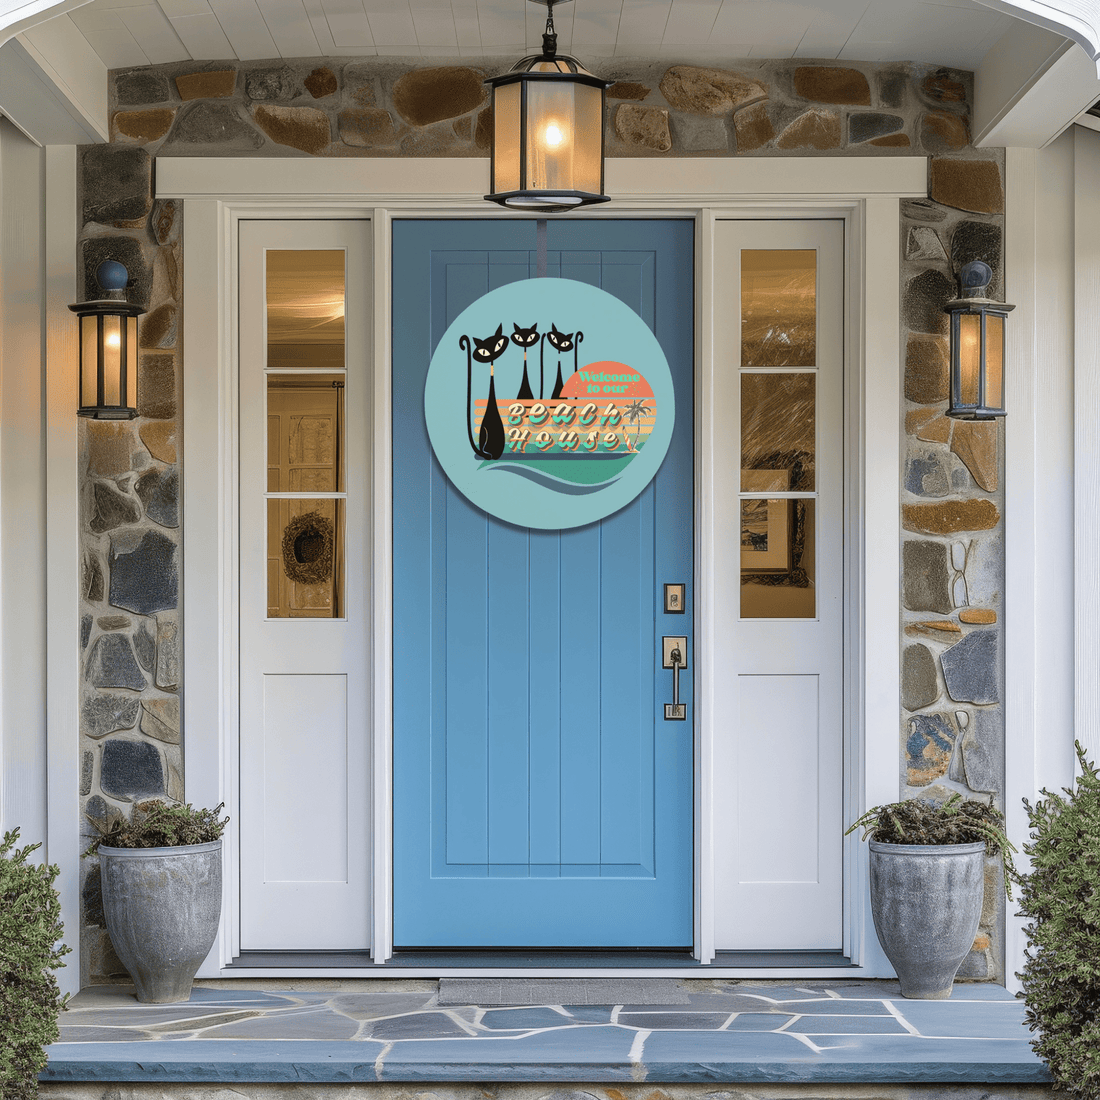 Kate McEnroe New York Retro Atomic Cat Beach House Welcome Door Sign, Mid Century Modern Wood Entry Decor 12&quot; (Round) Wood Round Signs Retro Atomic Cat Beach House Welcome Door Sign, Mid Century Modern Wood Entry Decor 12&quot; (Round) PMH58-12.2460790